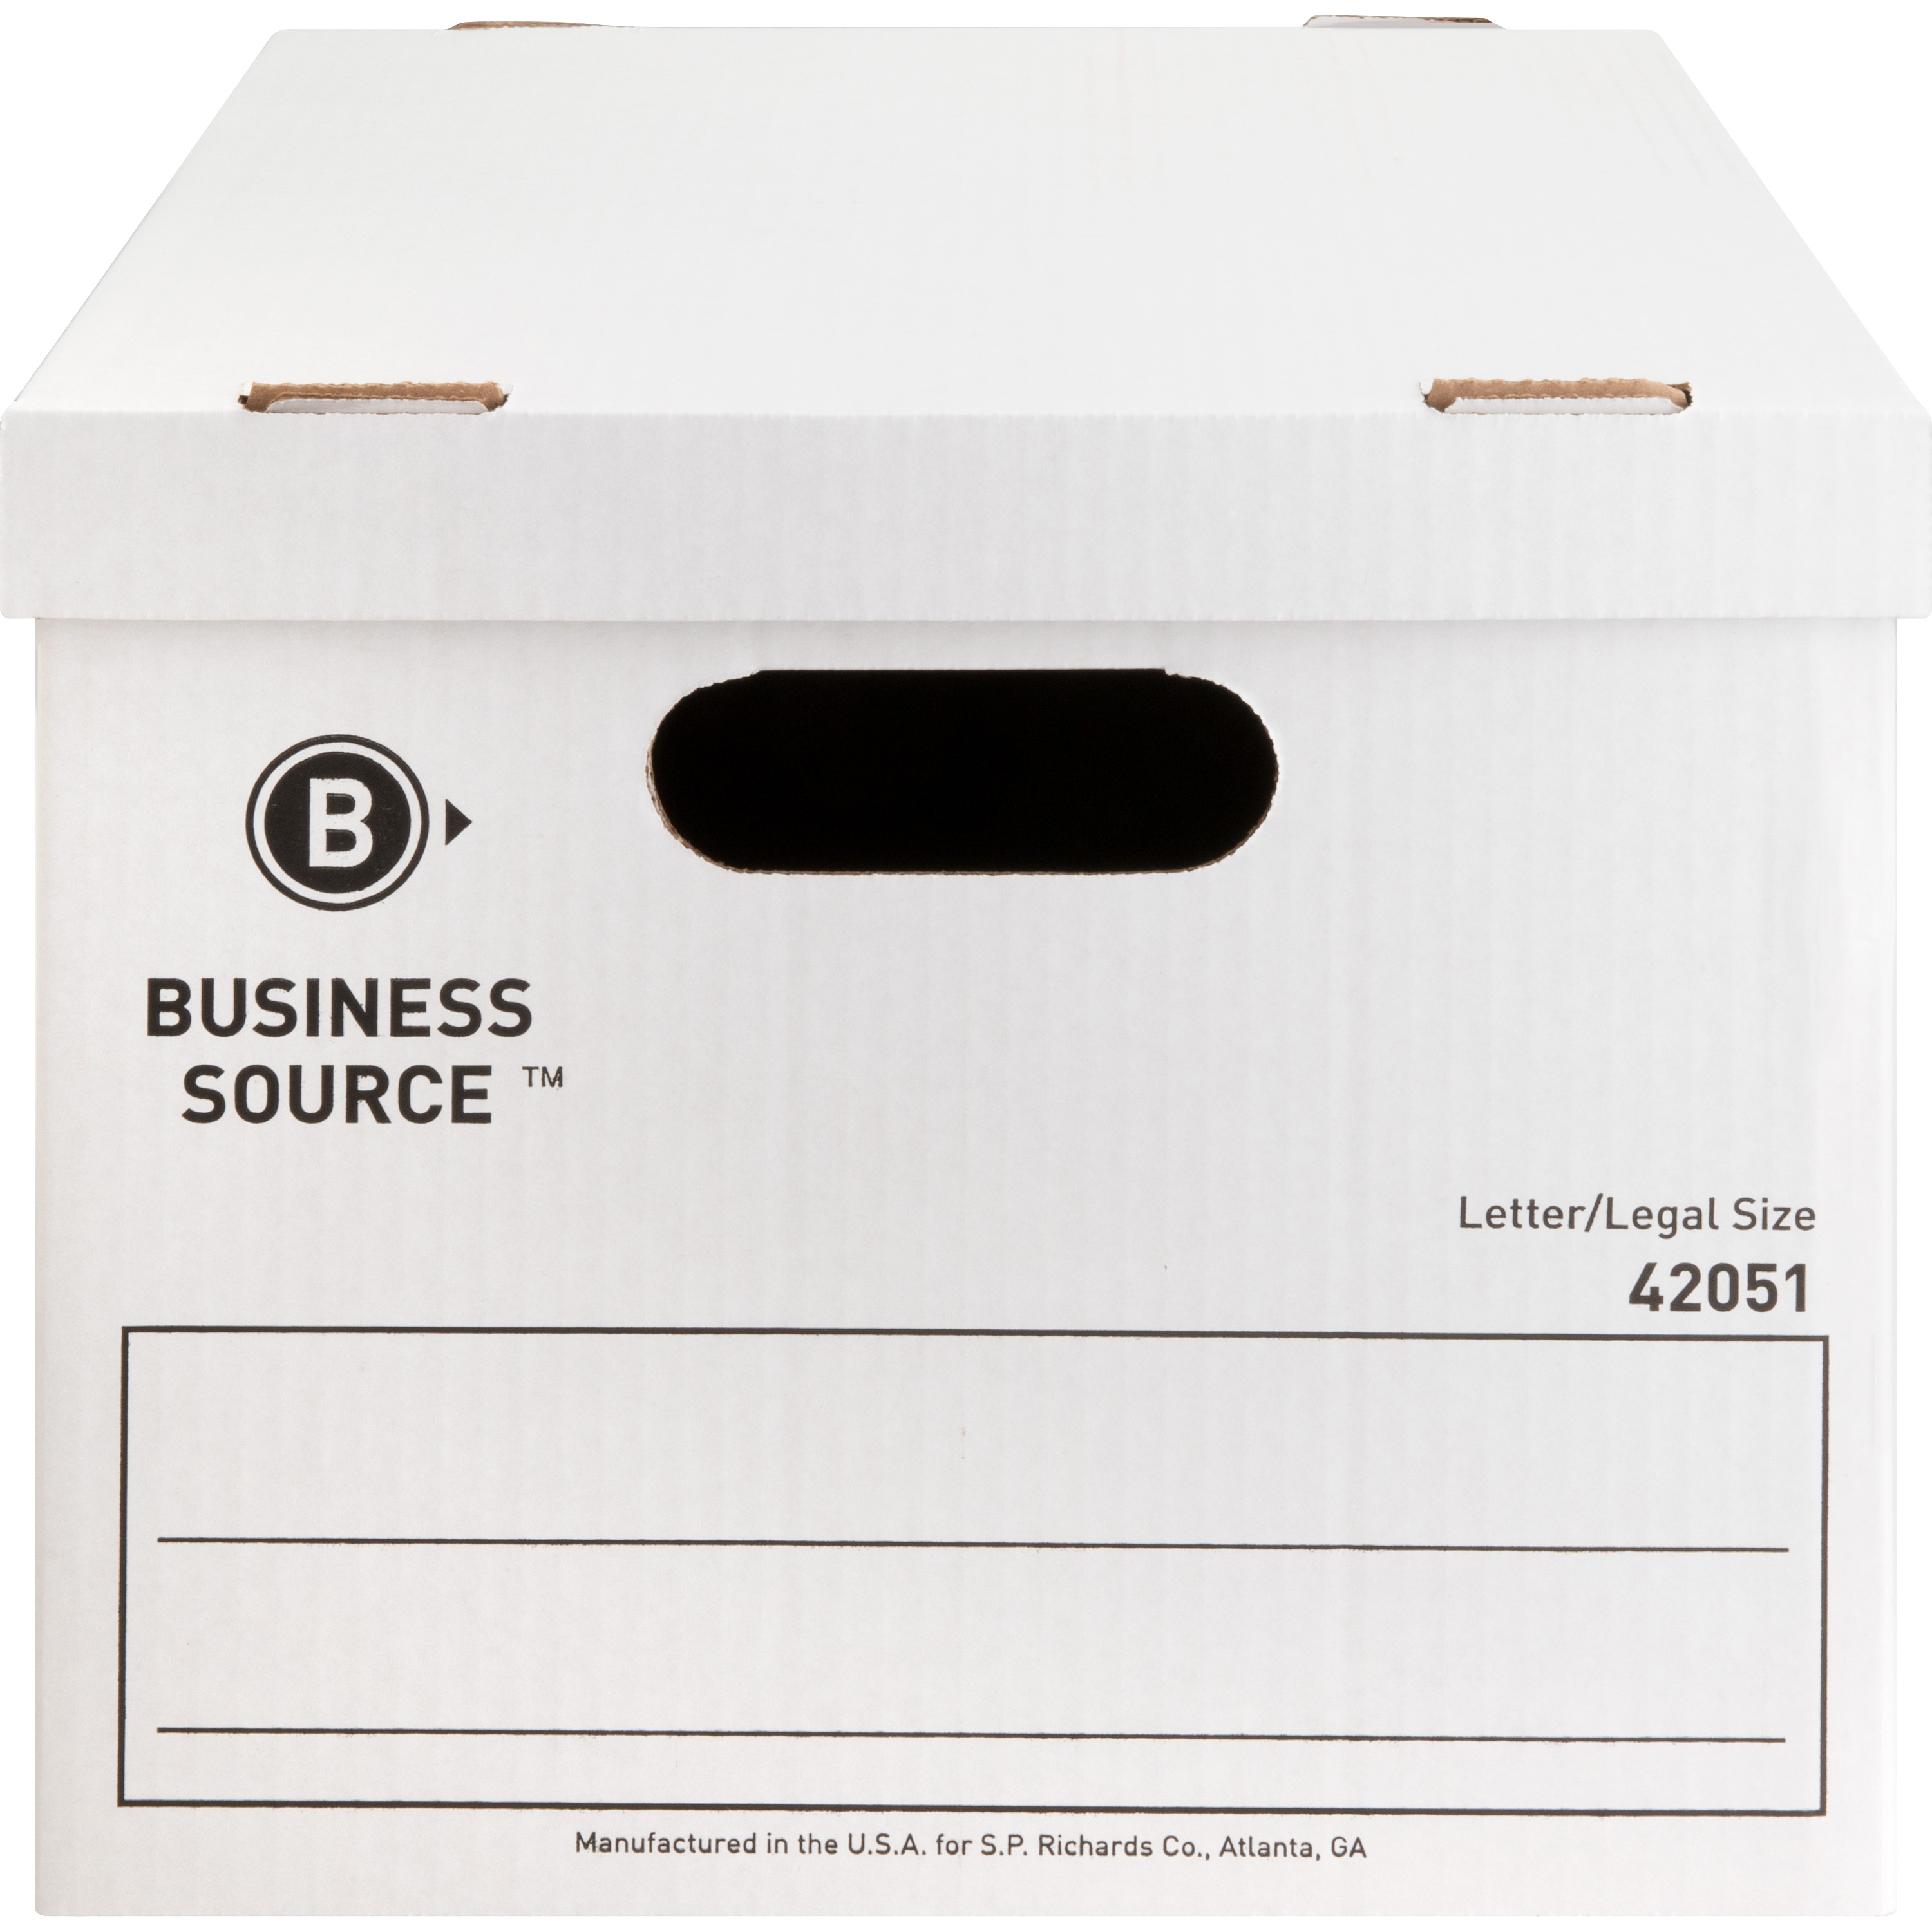 Economy Archive Boxes - 10 Pack, Filing & Folders